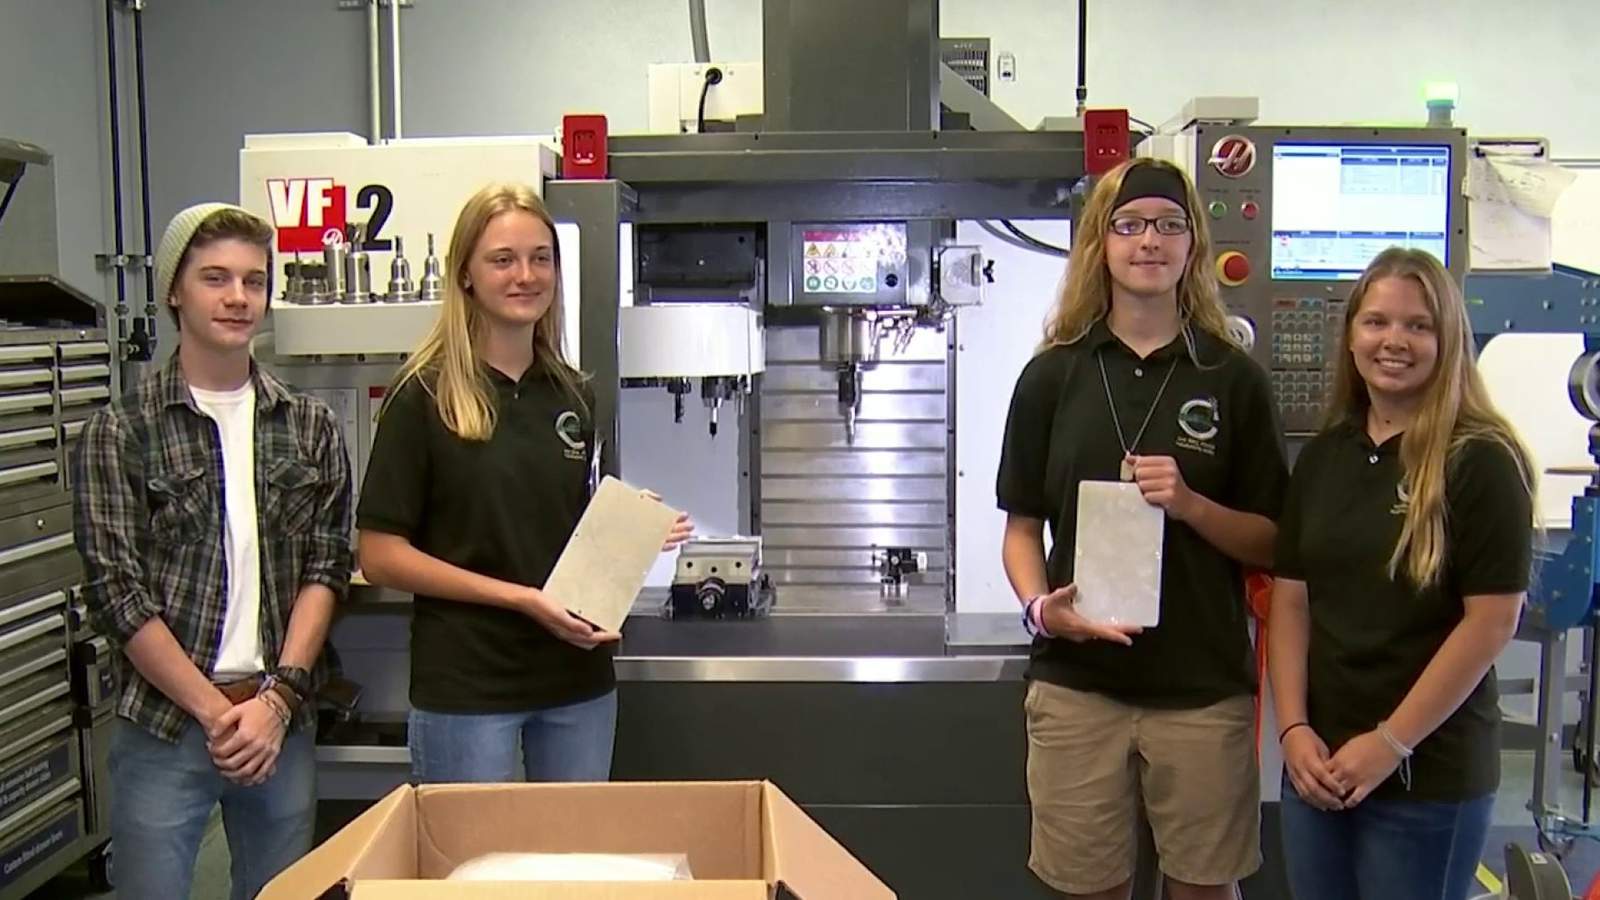 Pine Ridge High students help build parts for NASA that will launch into space